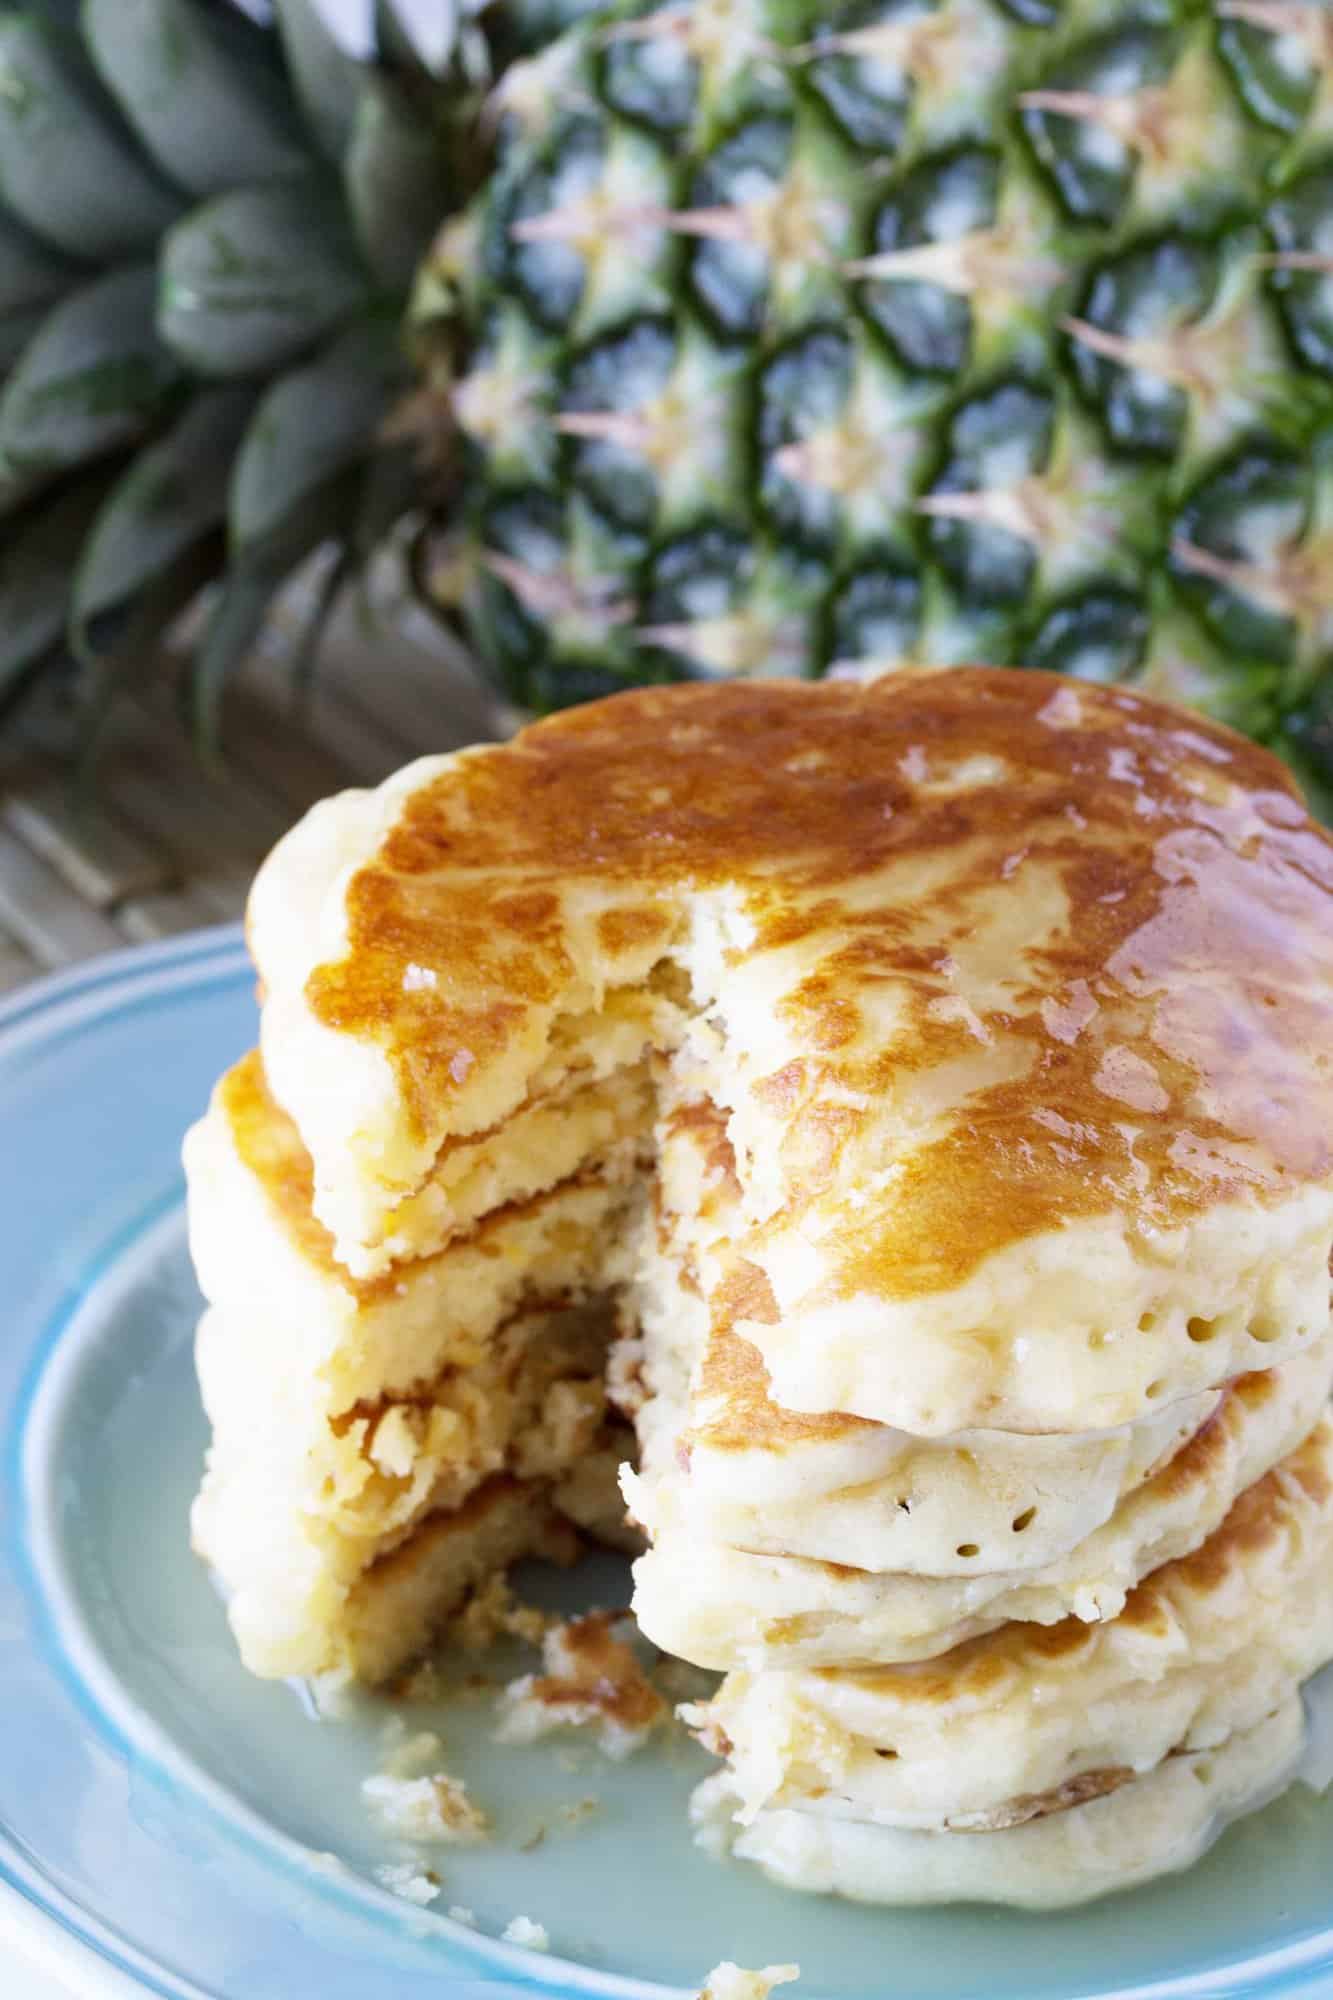 Pineapple Pancakes with Coconut Syrup over them with a bite cut out of the stack.